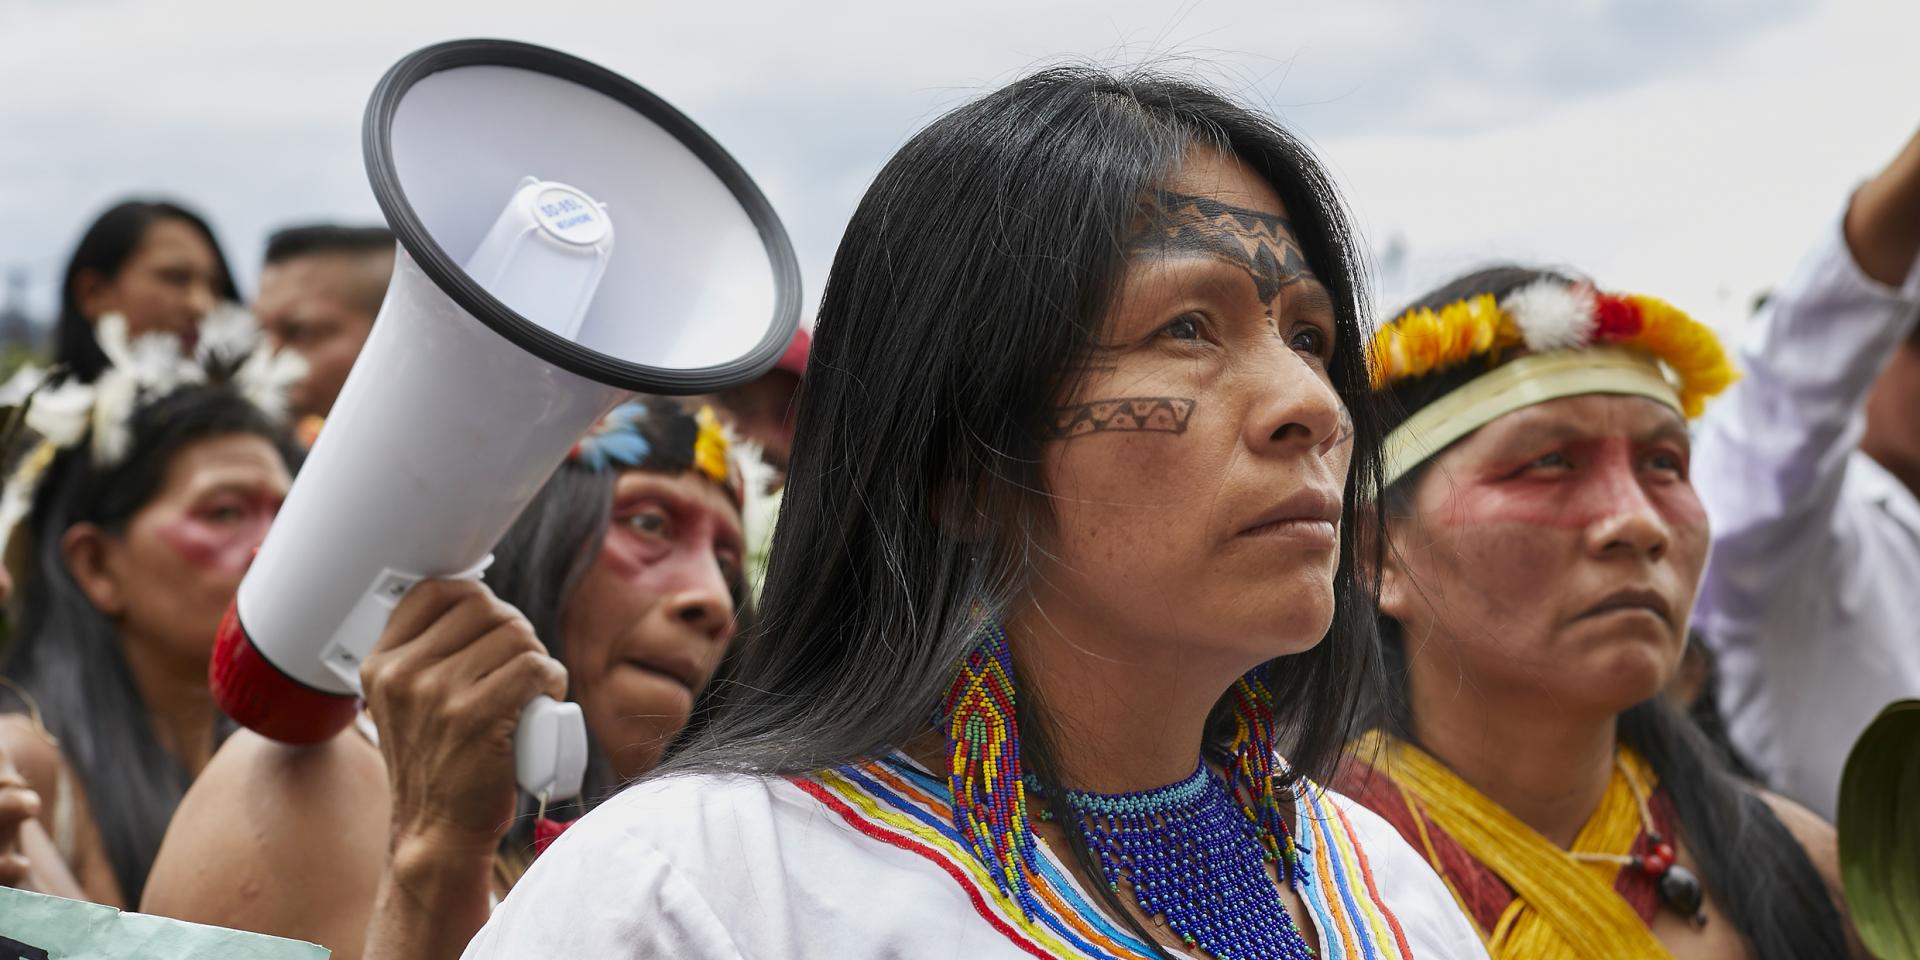 Amazonian women at a march for International Women's Day, March 8, 2020